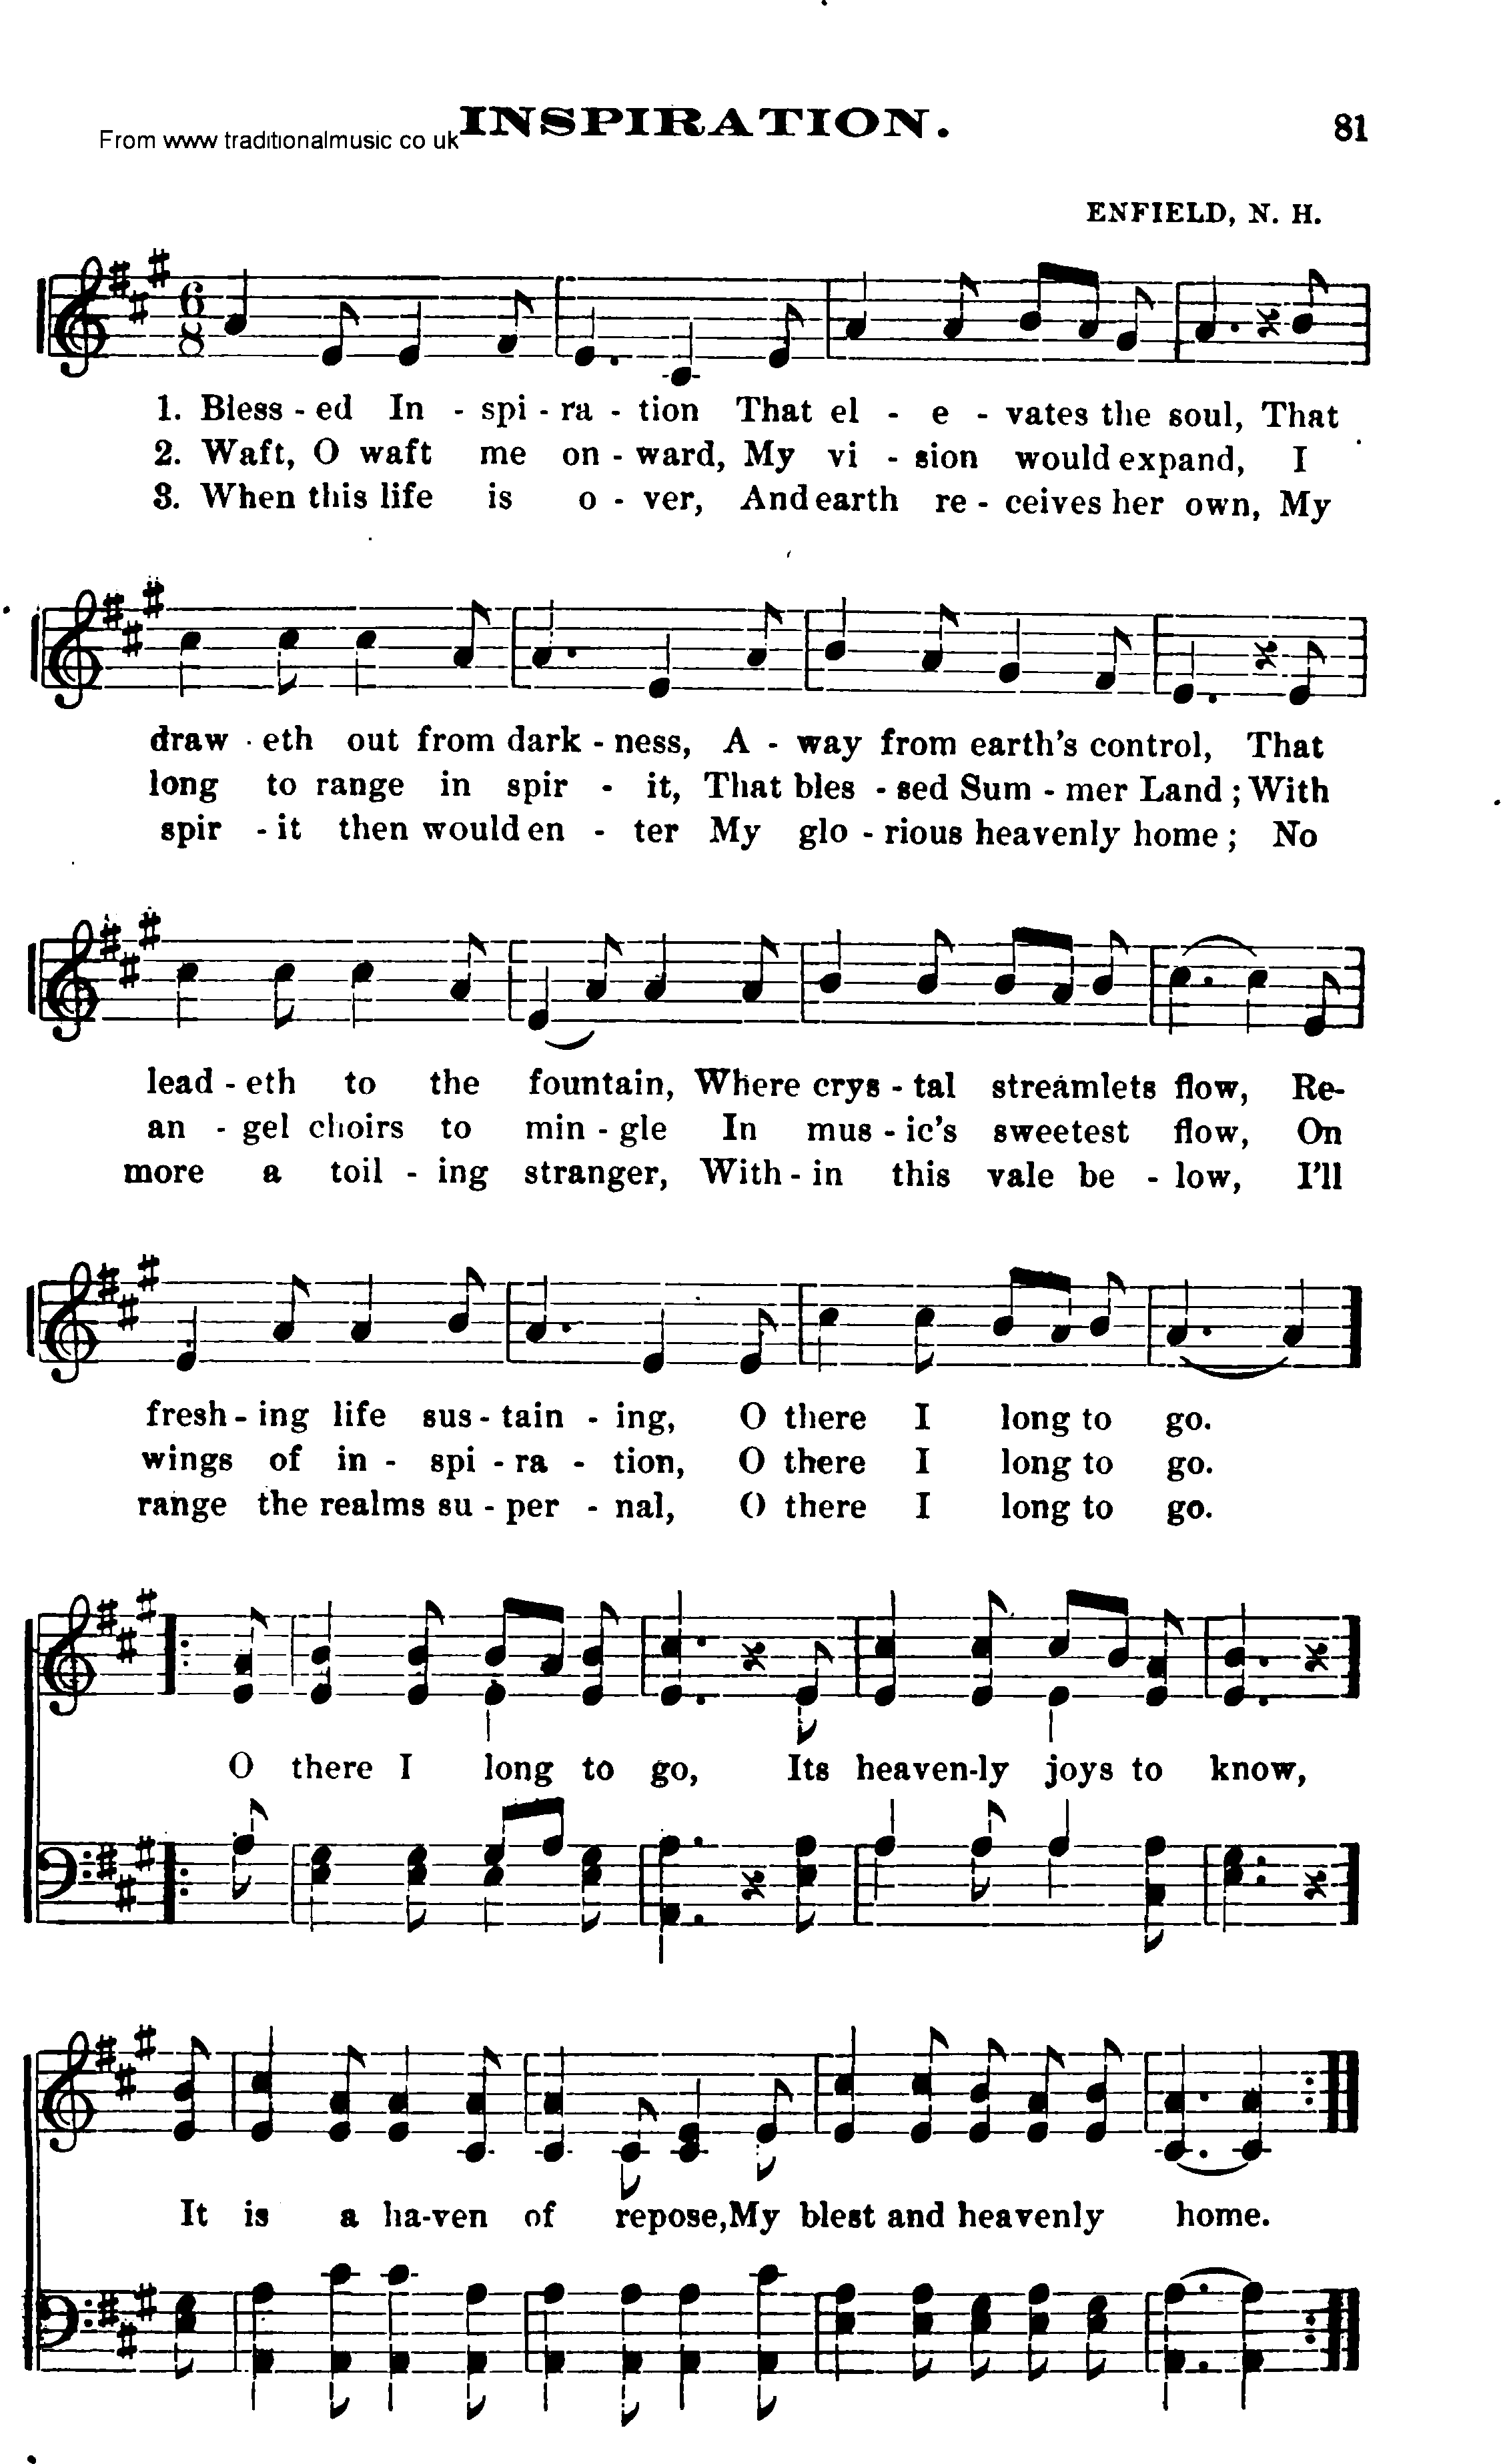 Shaker Music collection, Hymn: Inspiration, sheetmusic and PDF